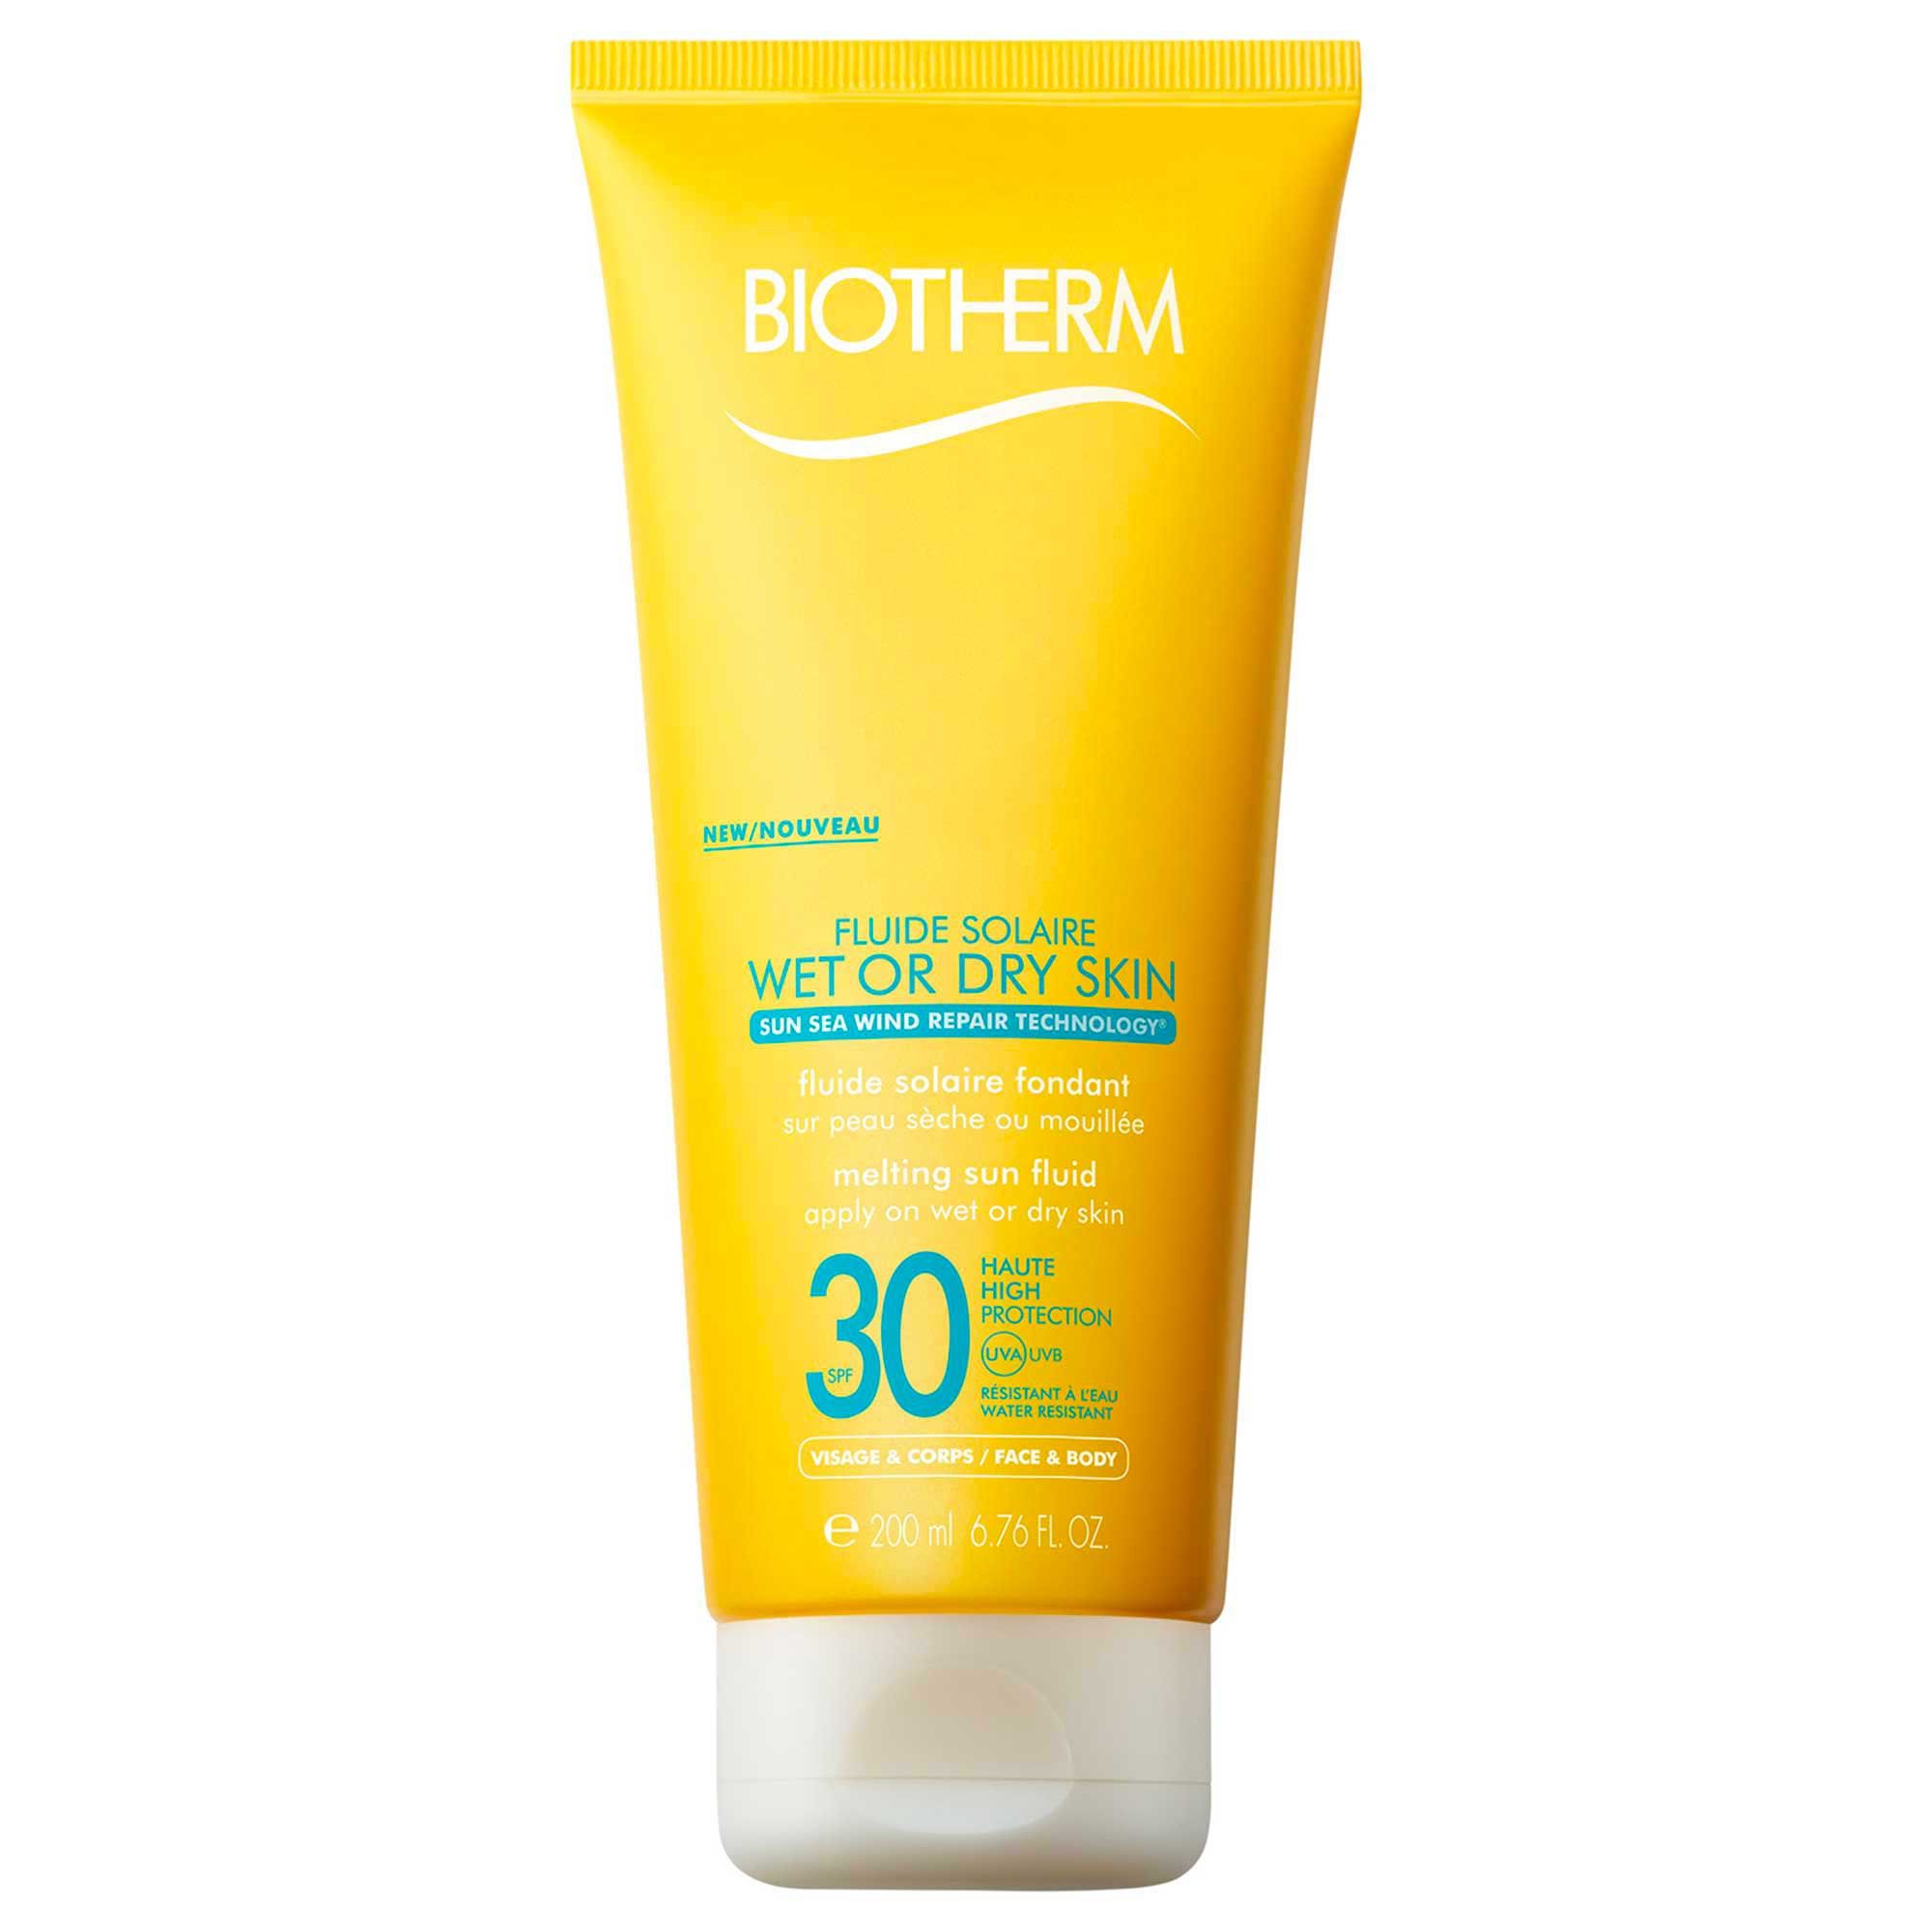 Biotherm Fluide Solaire Wet or Dry Skin Spf30